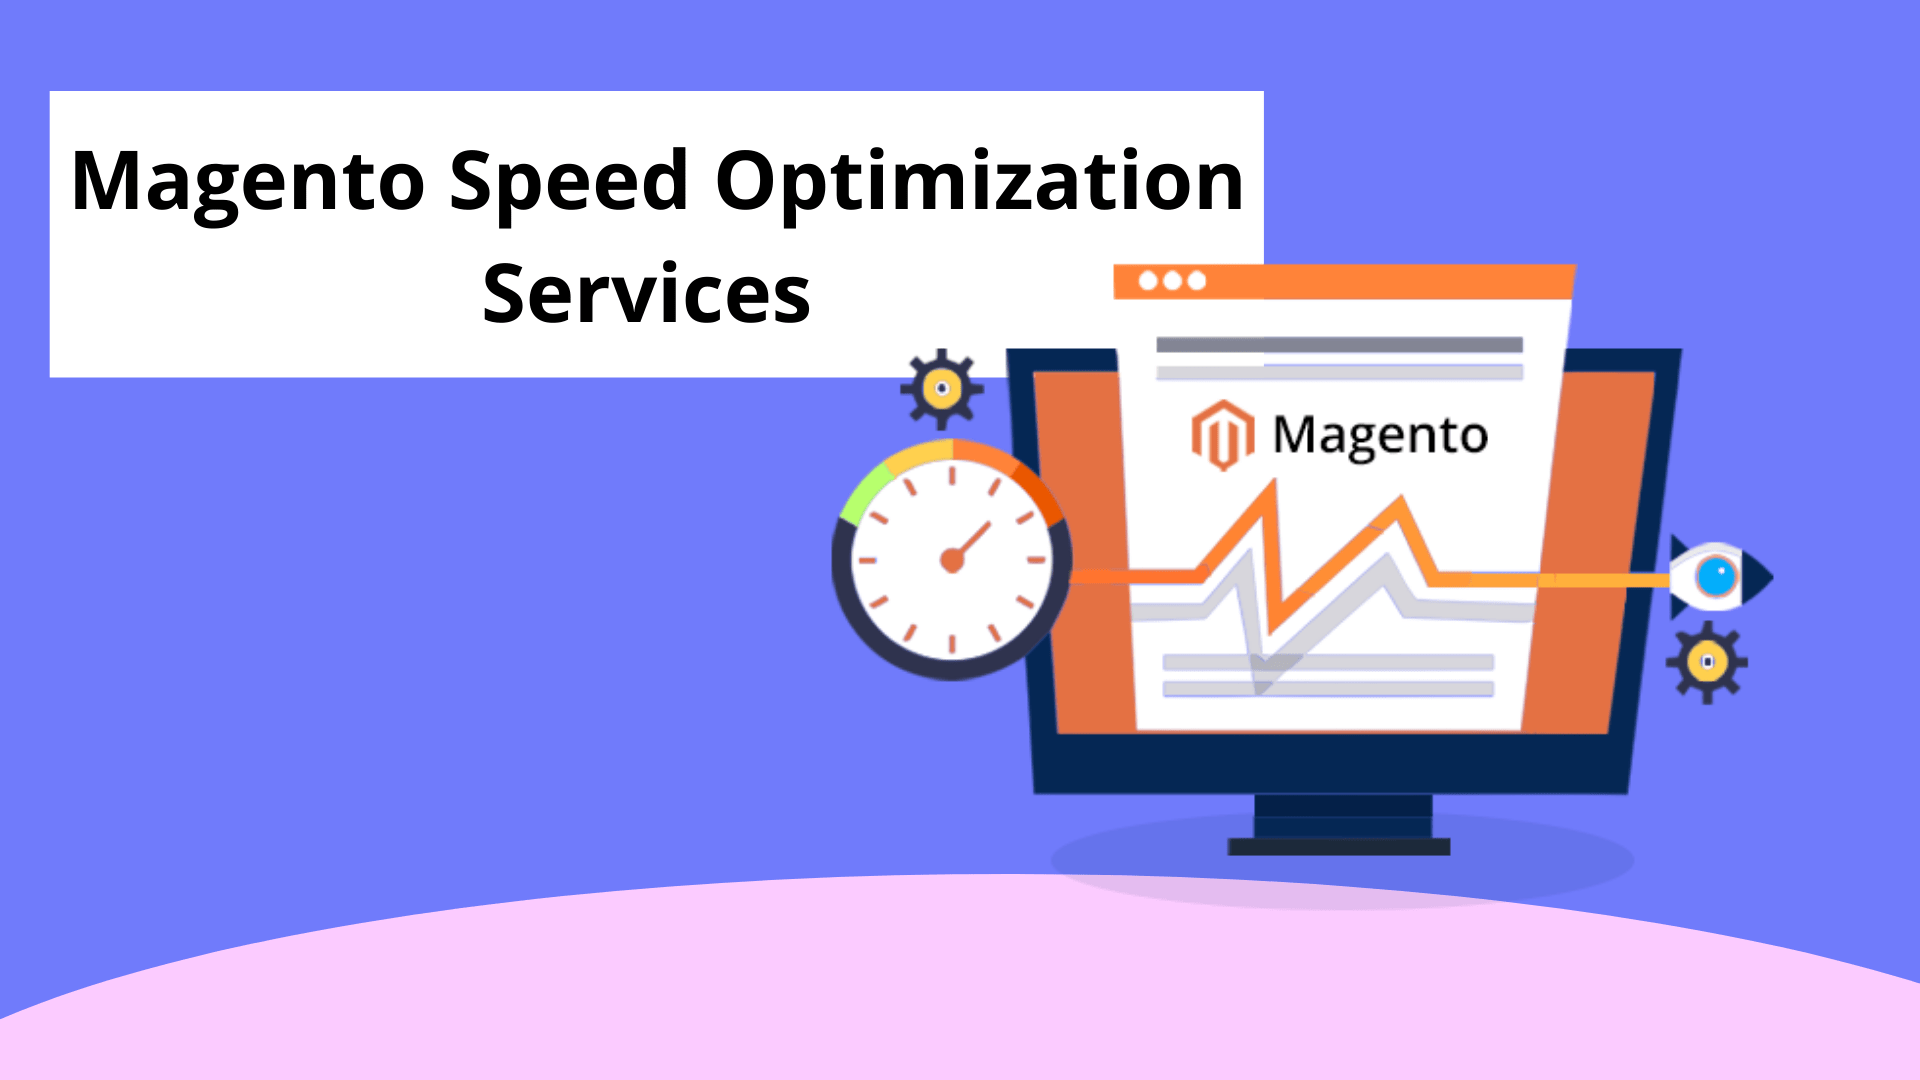 Magento Speed Optimization Services - Things You Need to Know